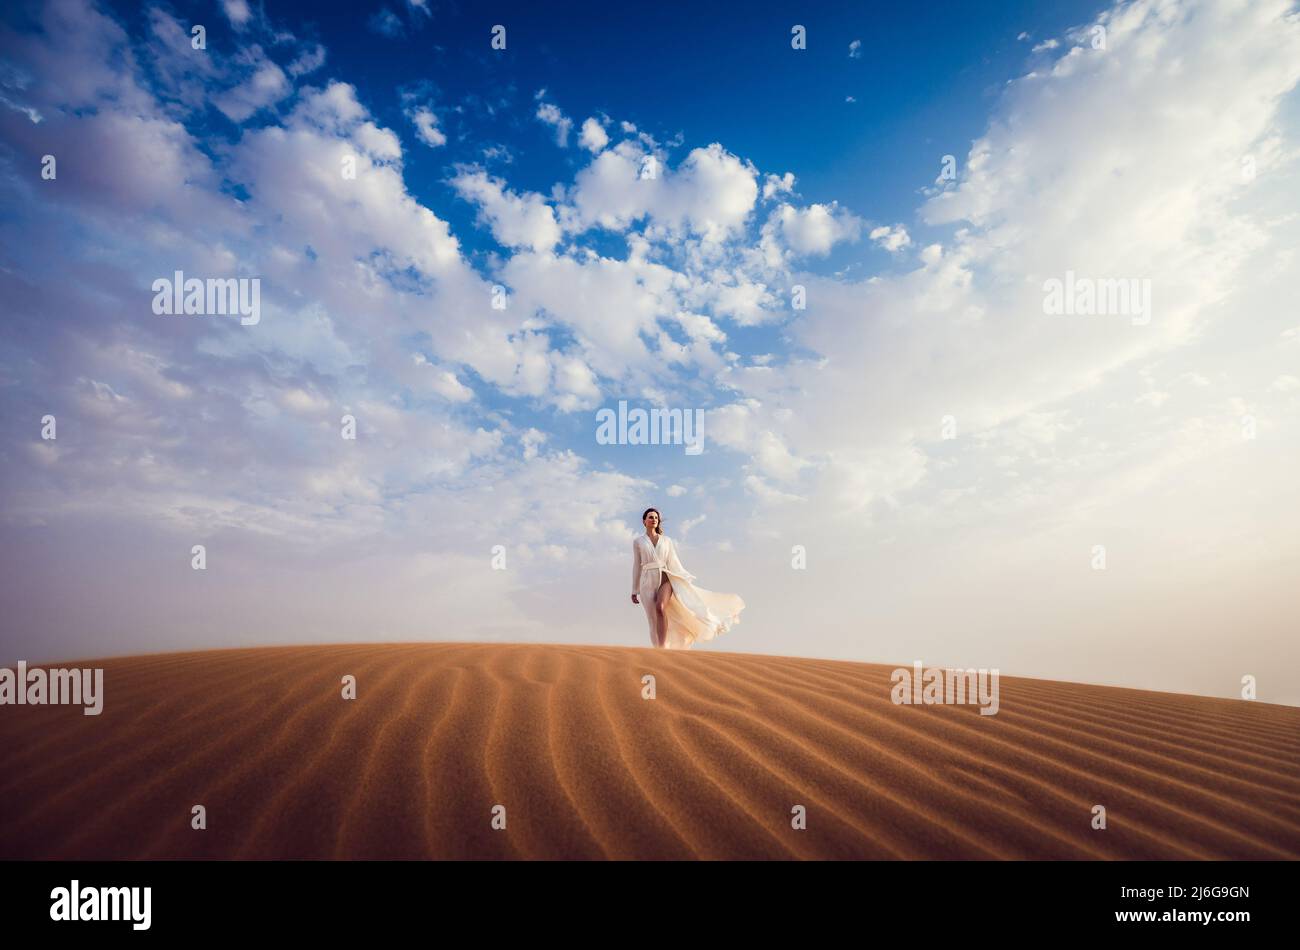 Woman finding freedom in desert Stock Photo